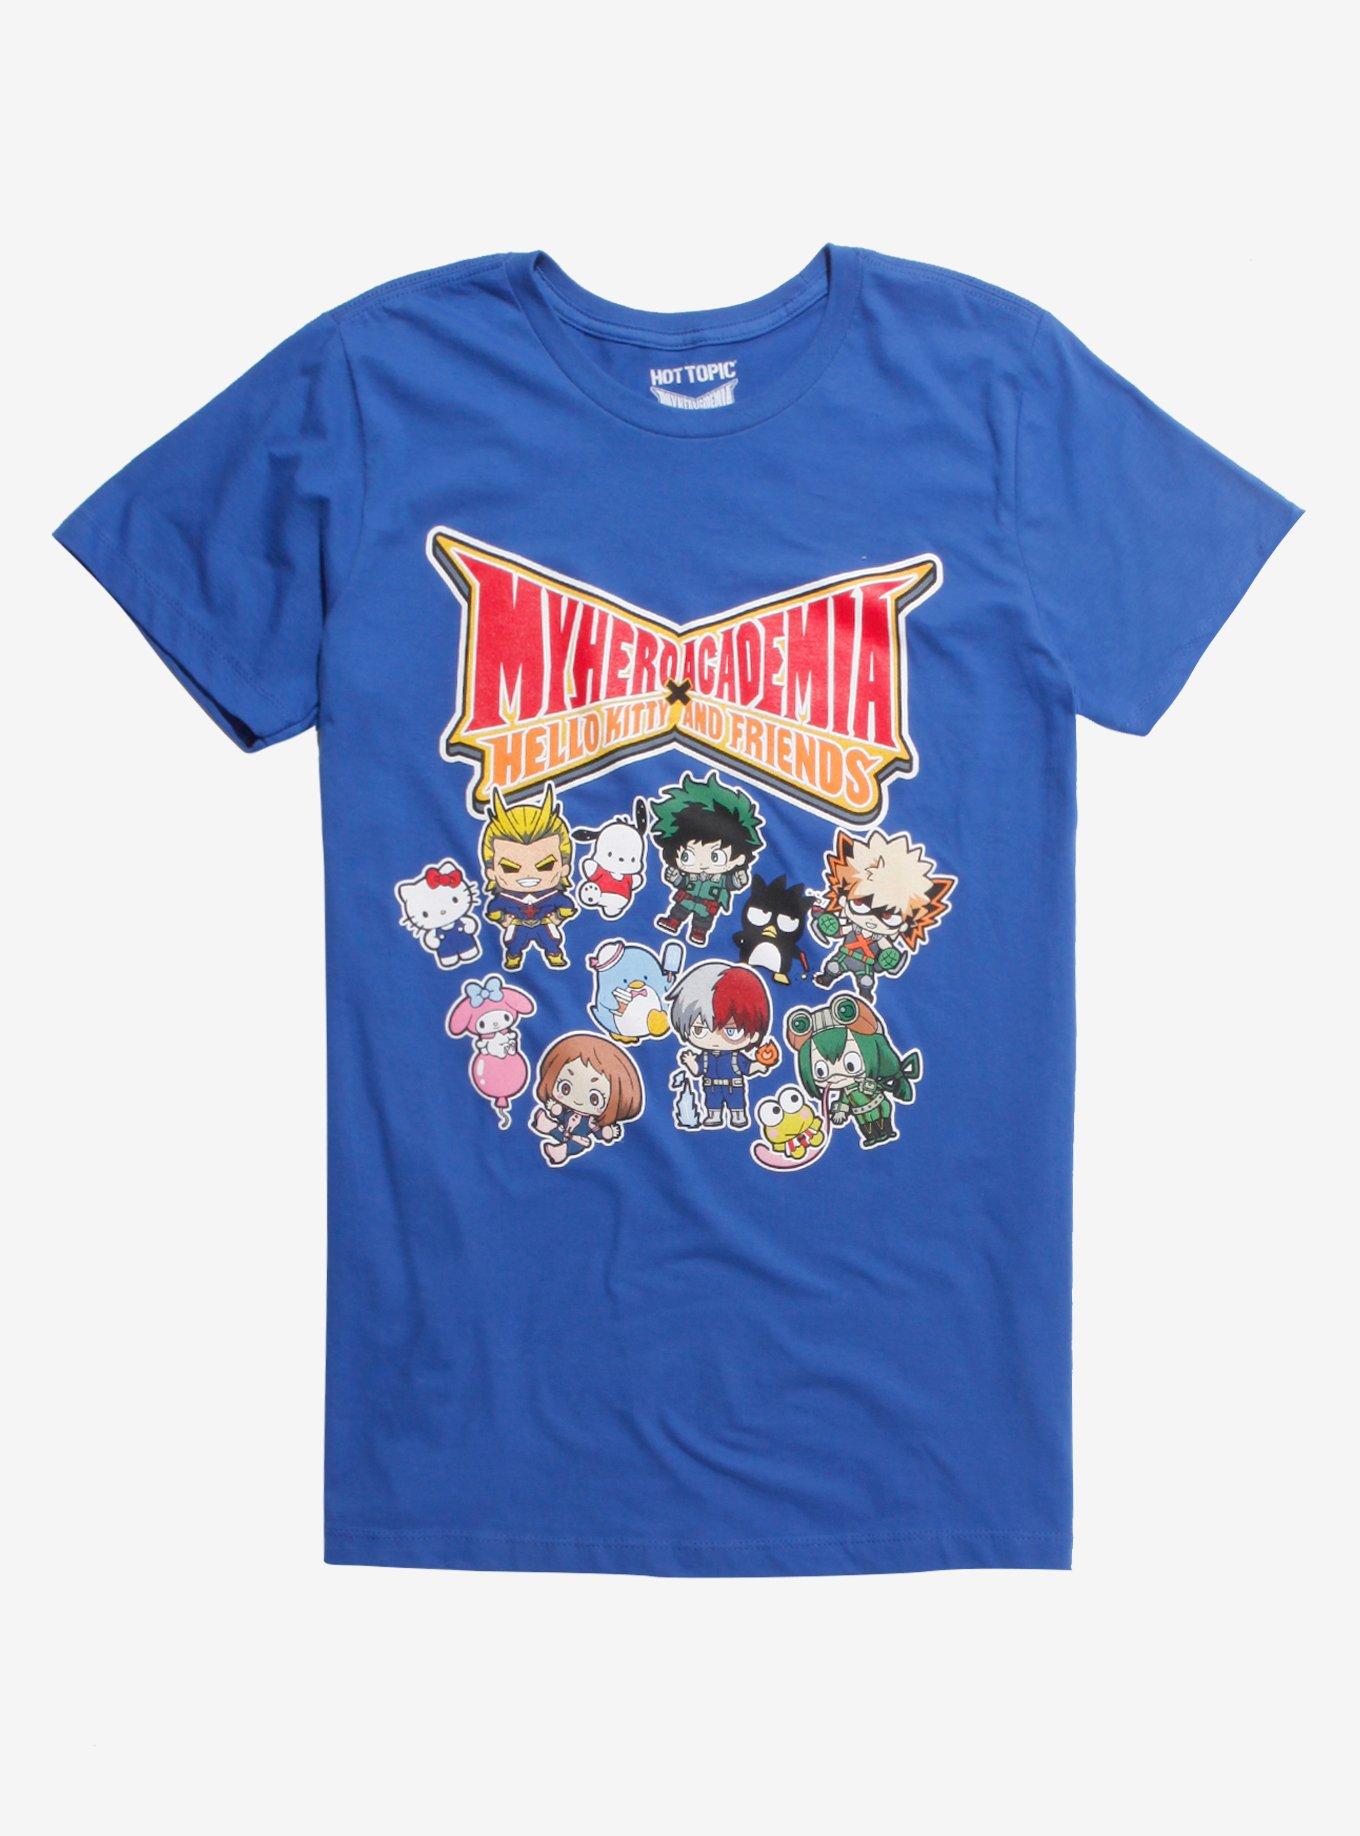 My Hero Academia X Hello Kitty And Friends Characters T-Shirt, BLUE, hi-res